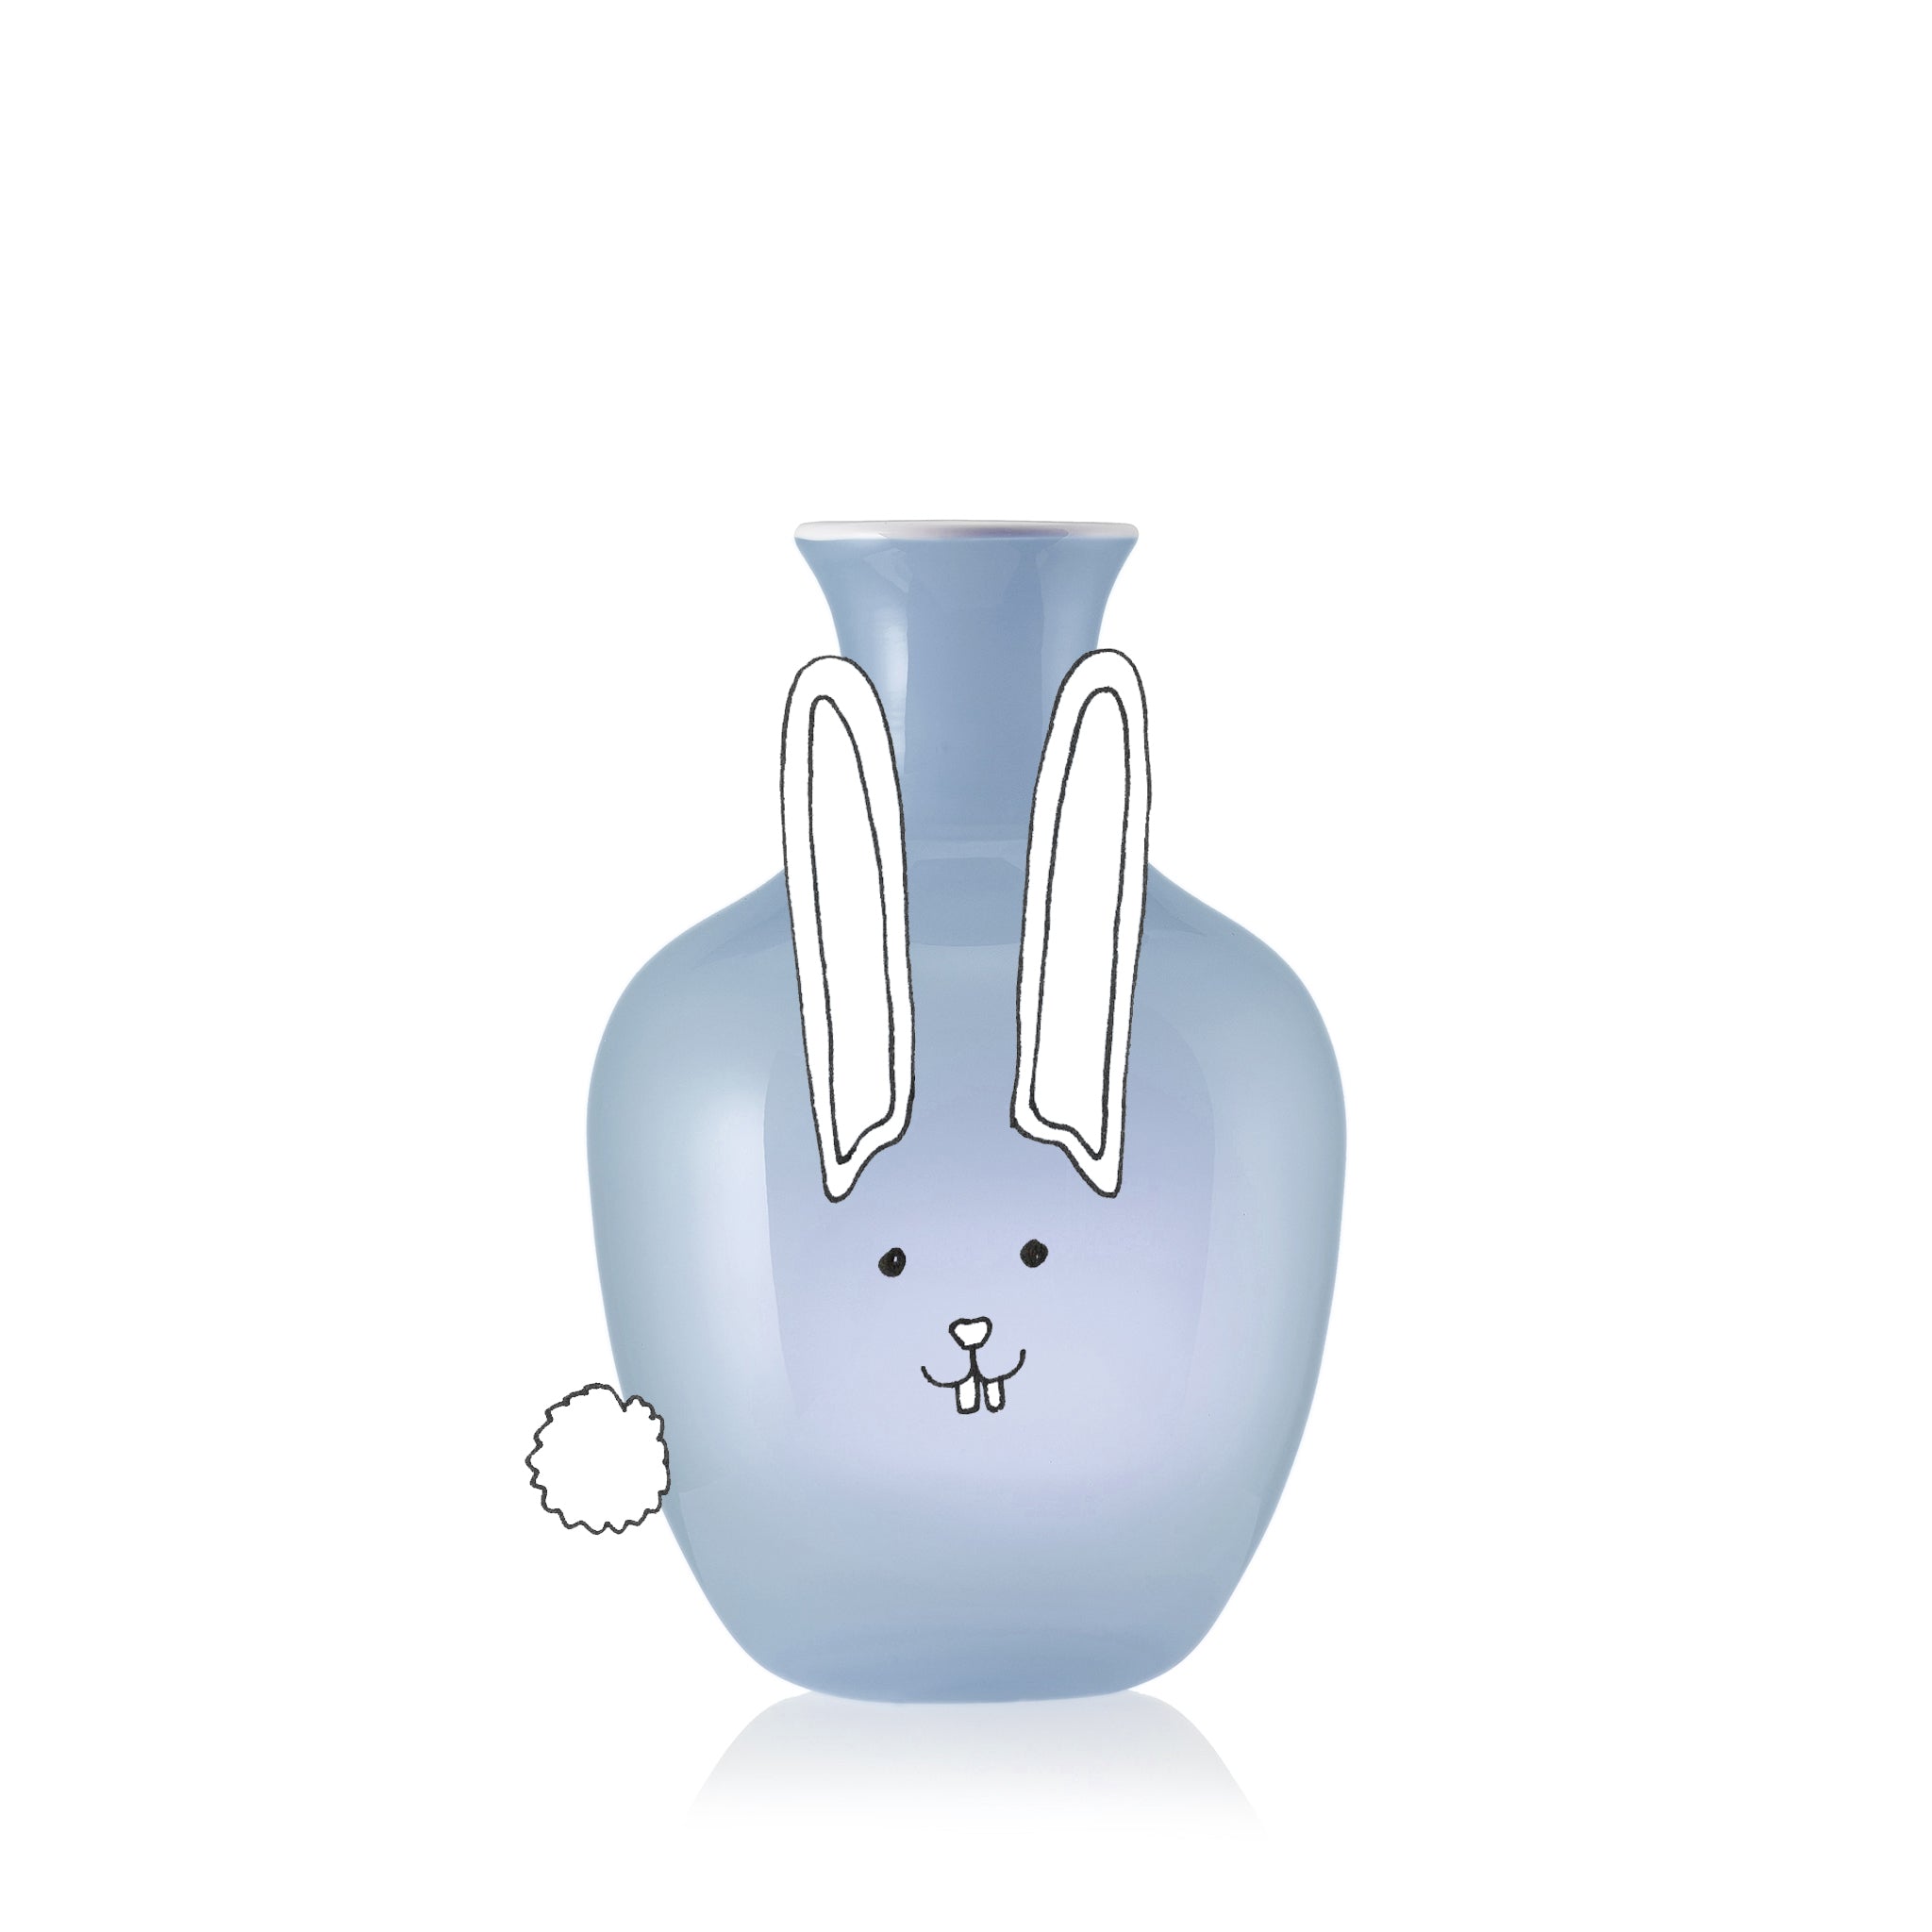 Handblown Glass Bumba Bedside Carafe and Glass Set in Powder Blue, 0.5L